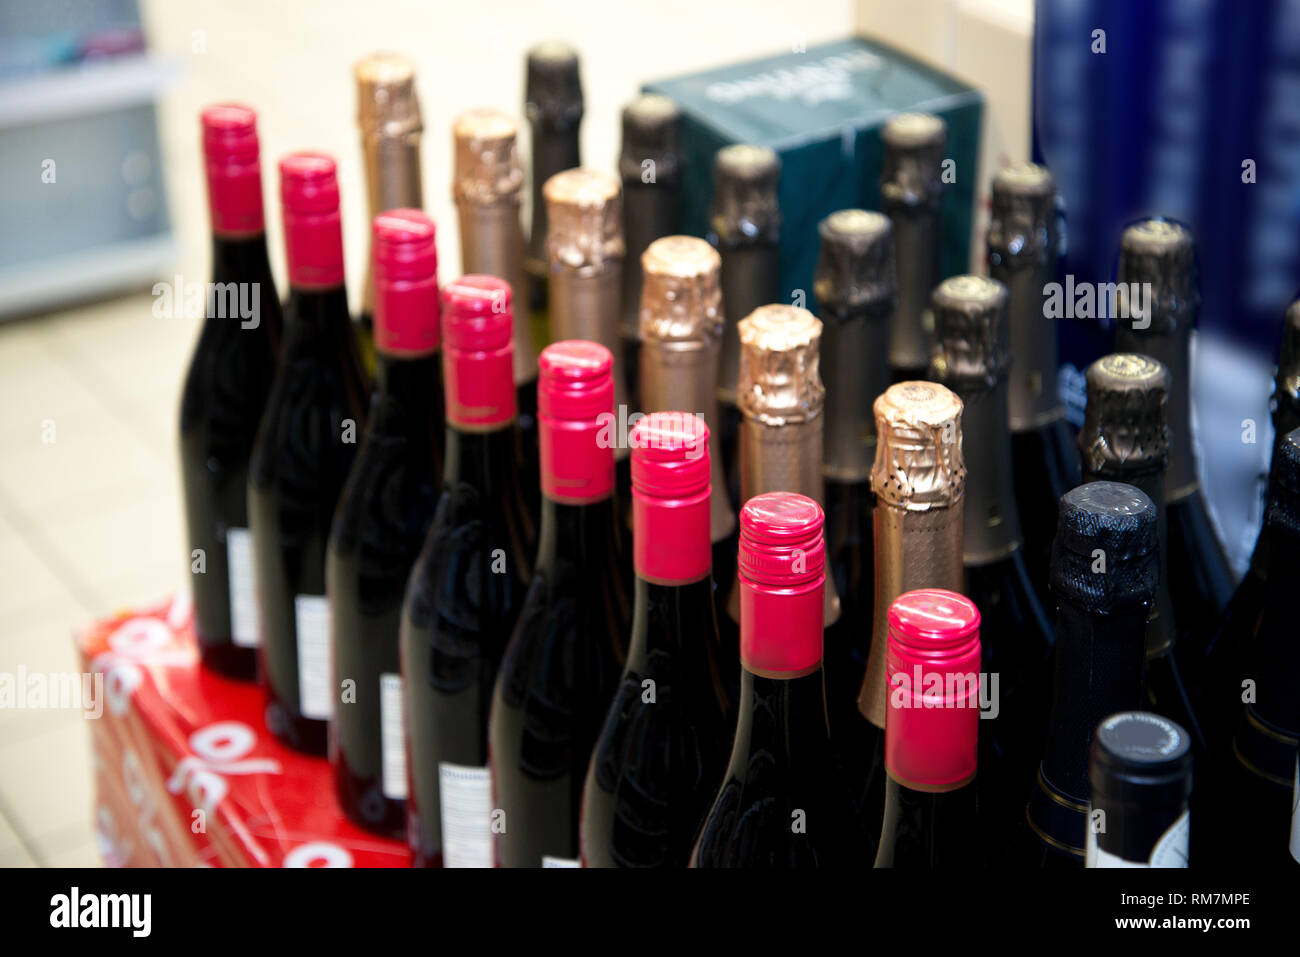 Rows of wine bottles. Wine bottles in the store Stock Photo